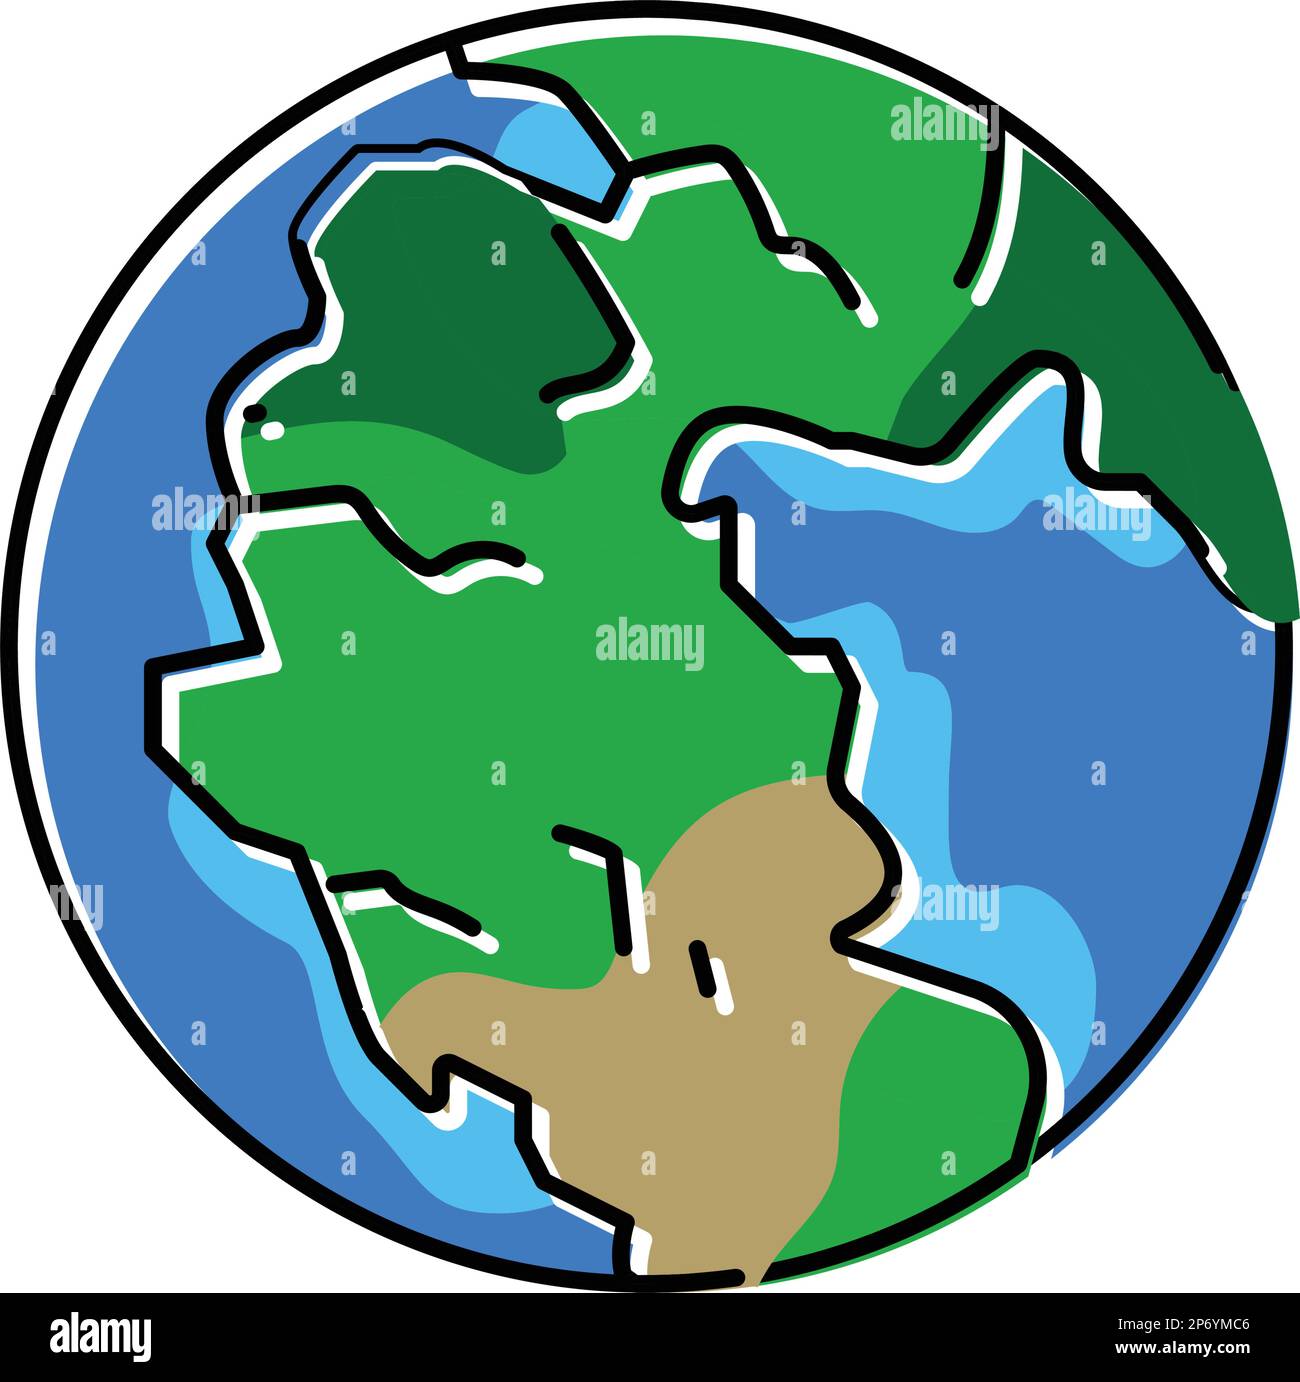 pangaea earth continent map color icon vector illustration Stock Vector ...